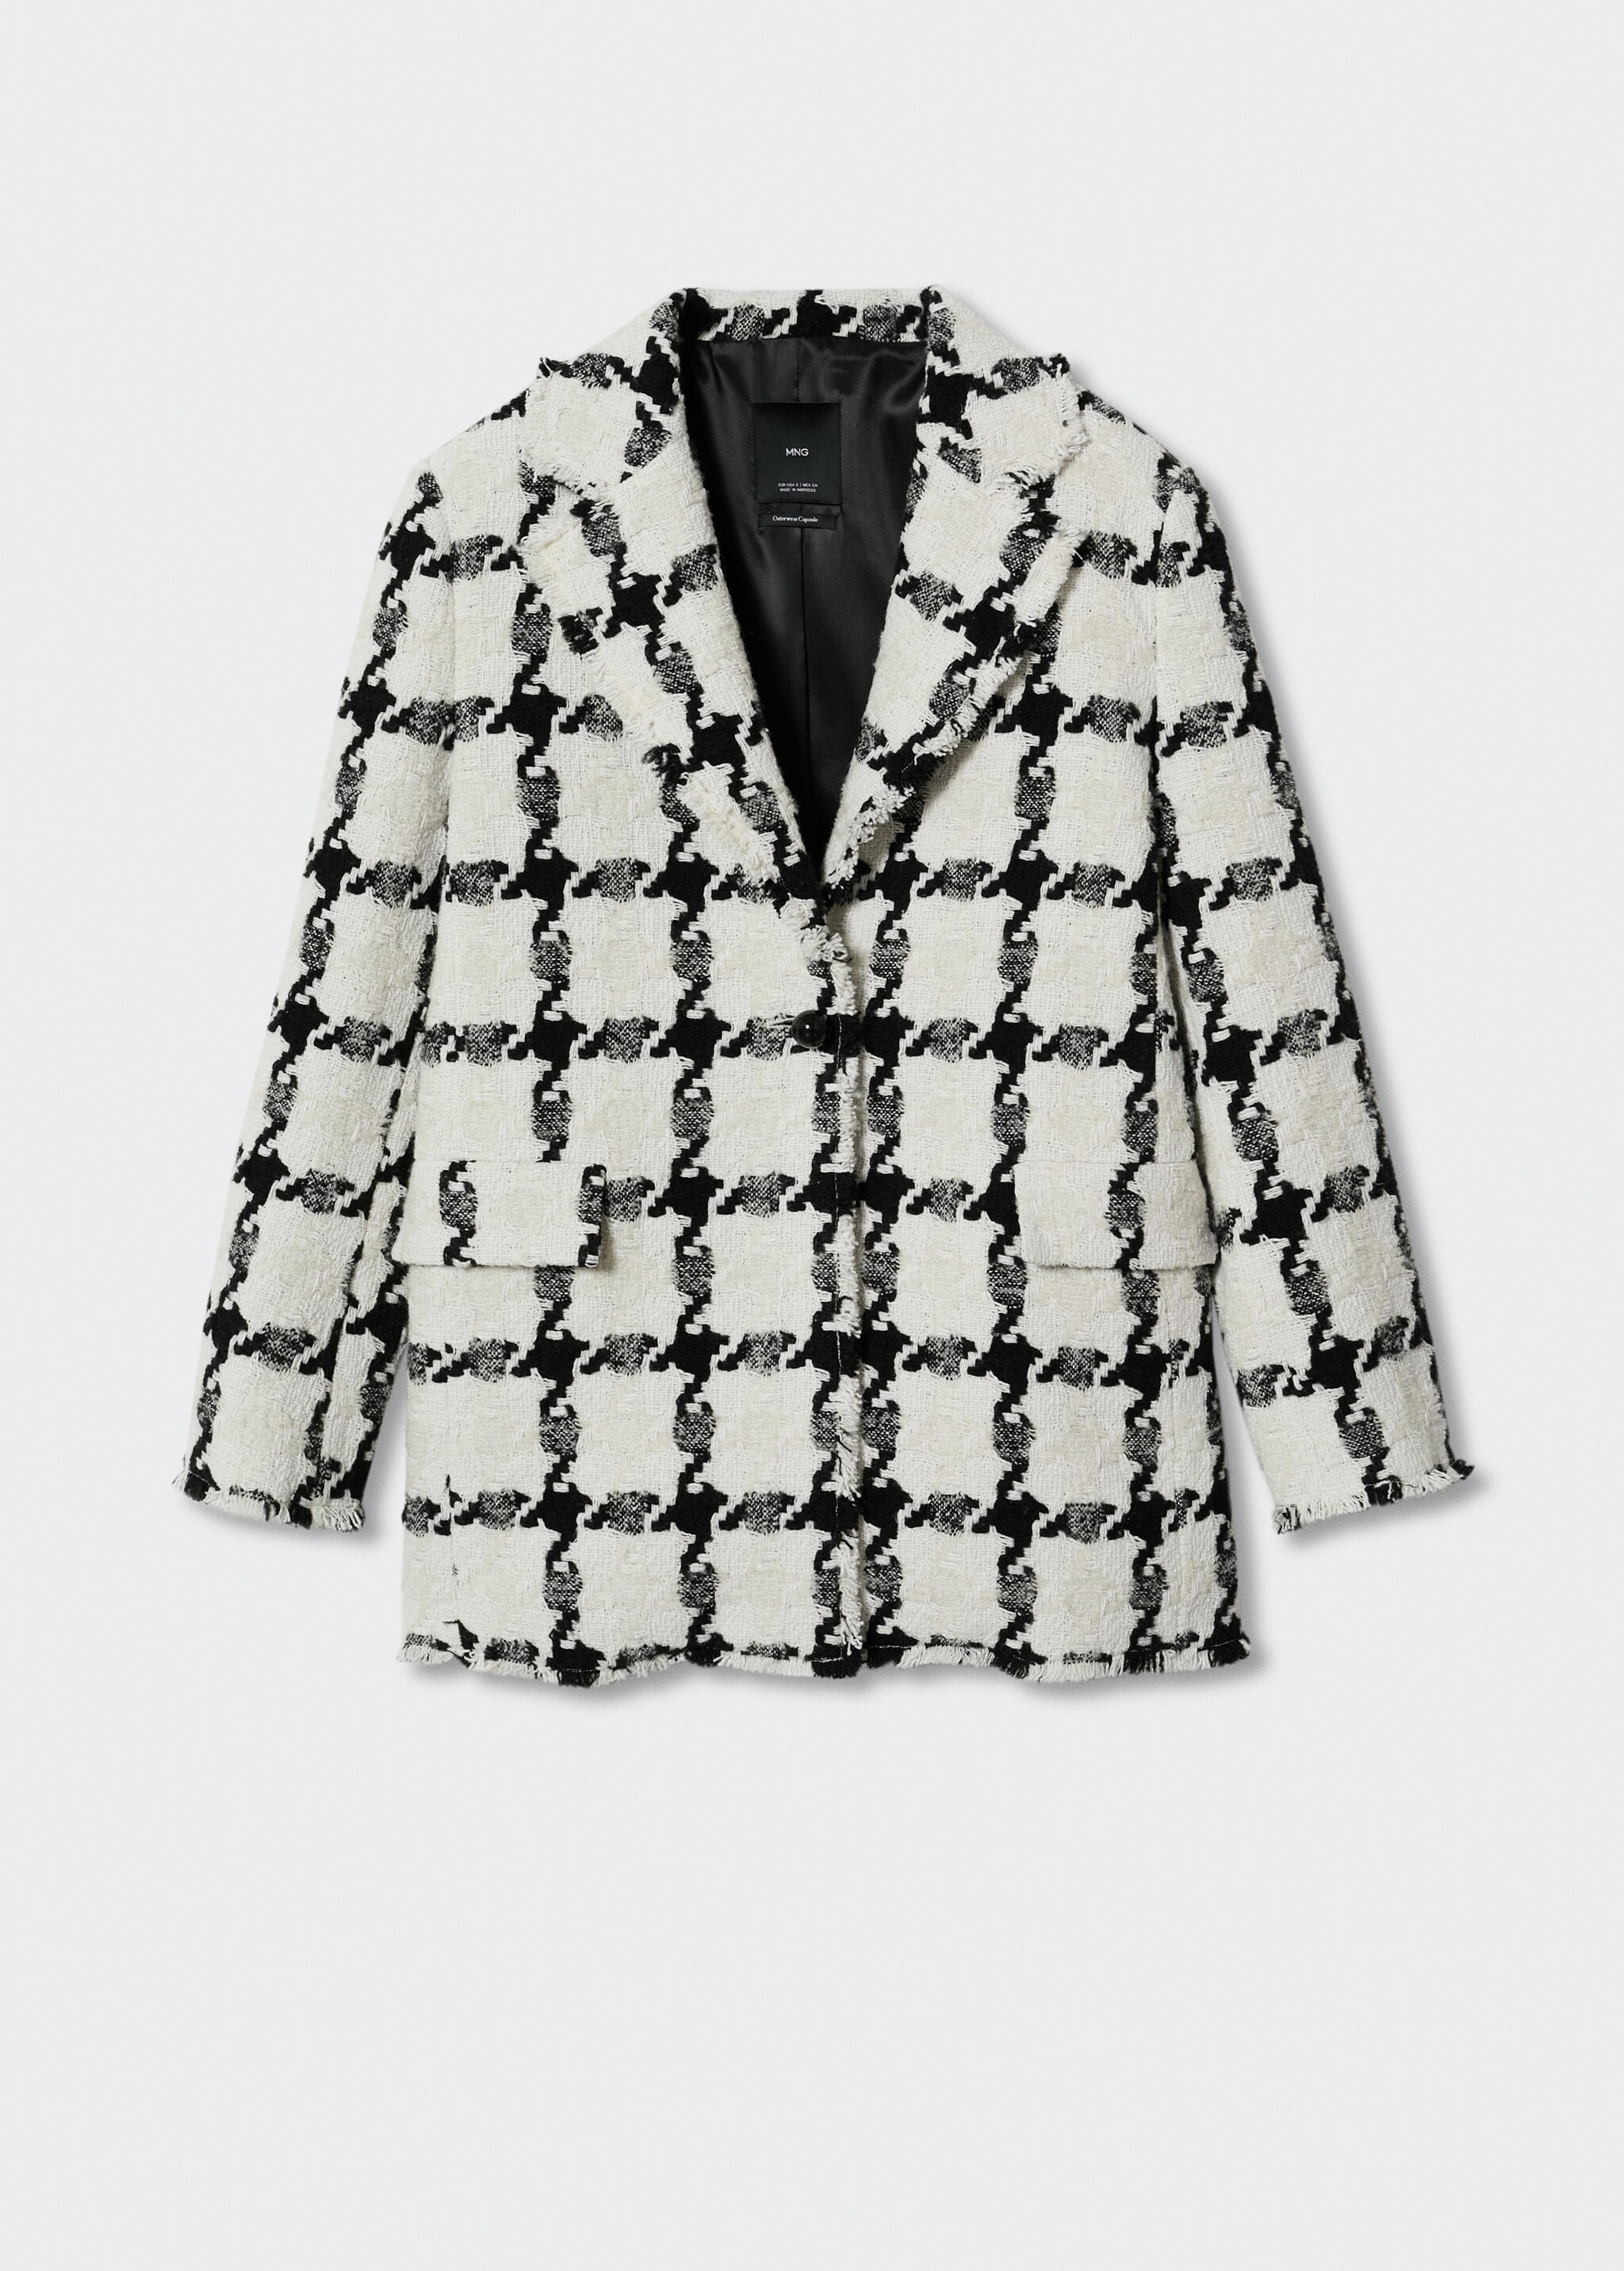 Checked tweed coat - Article without model